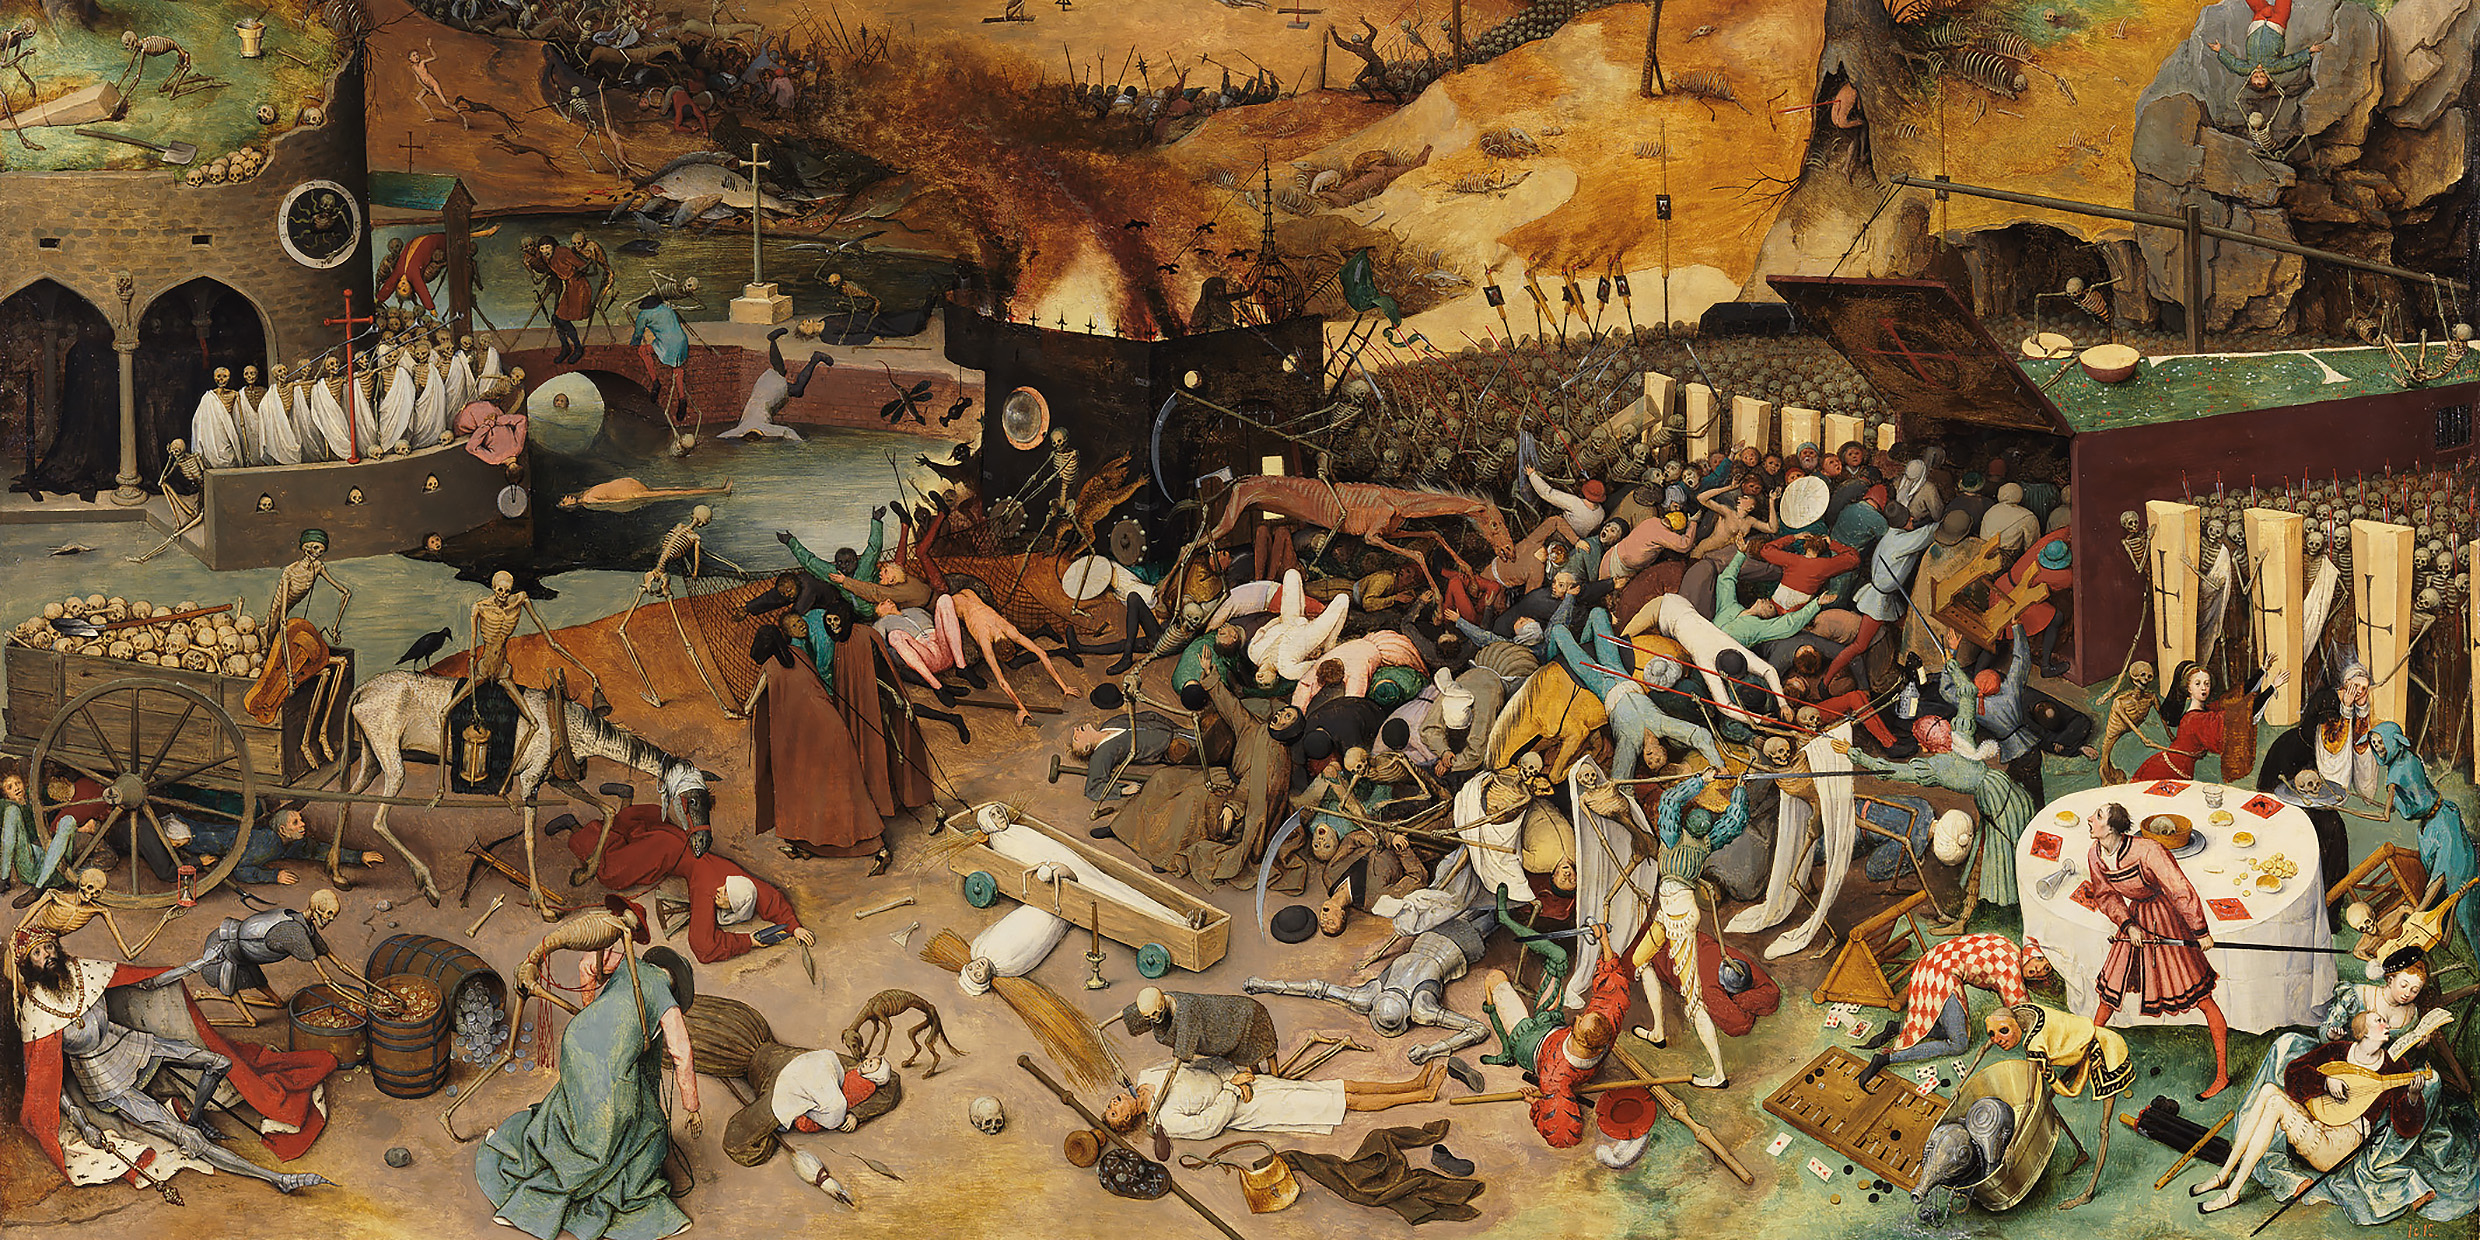 Painting of chaos and death brought about by plague